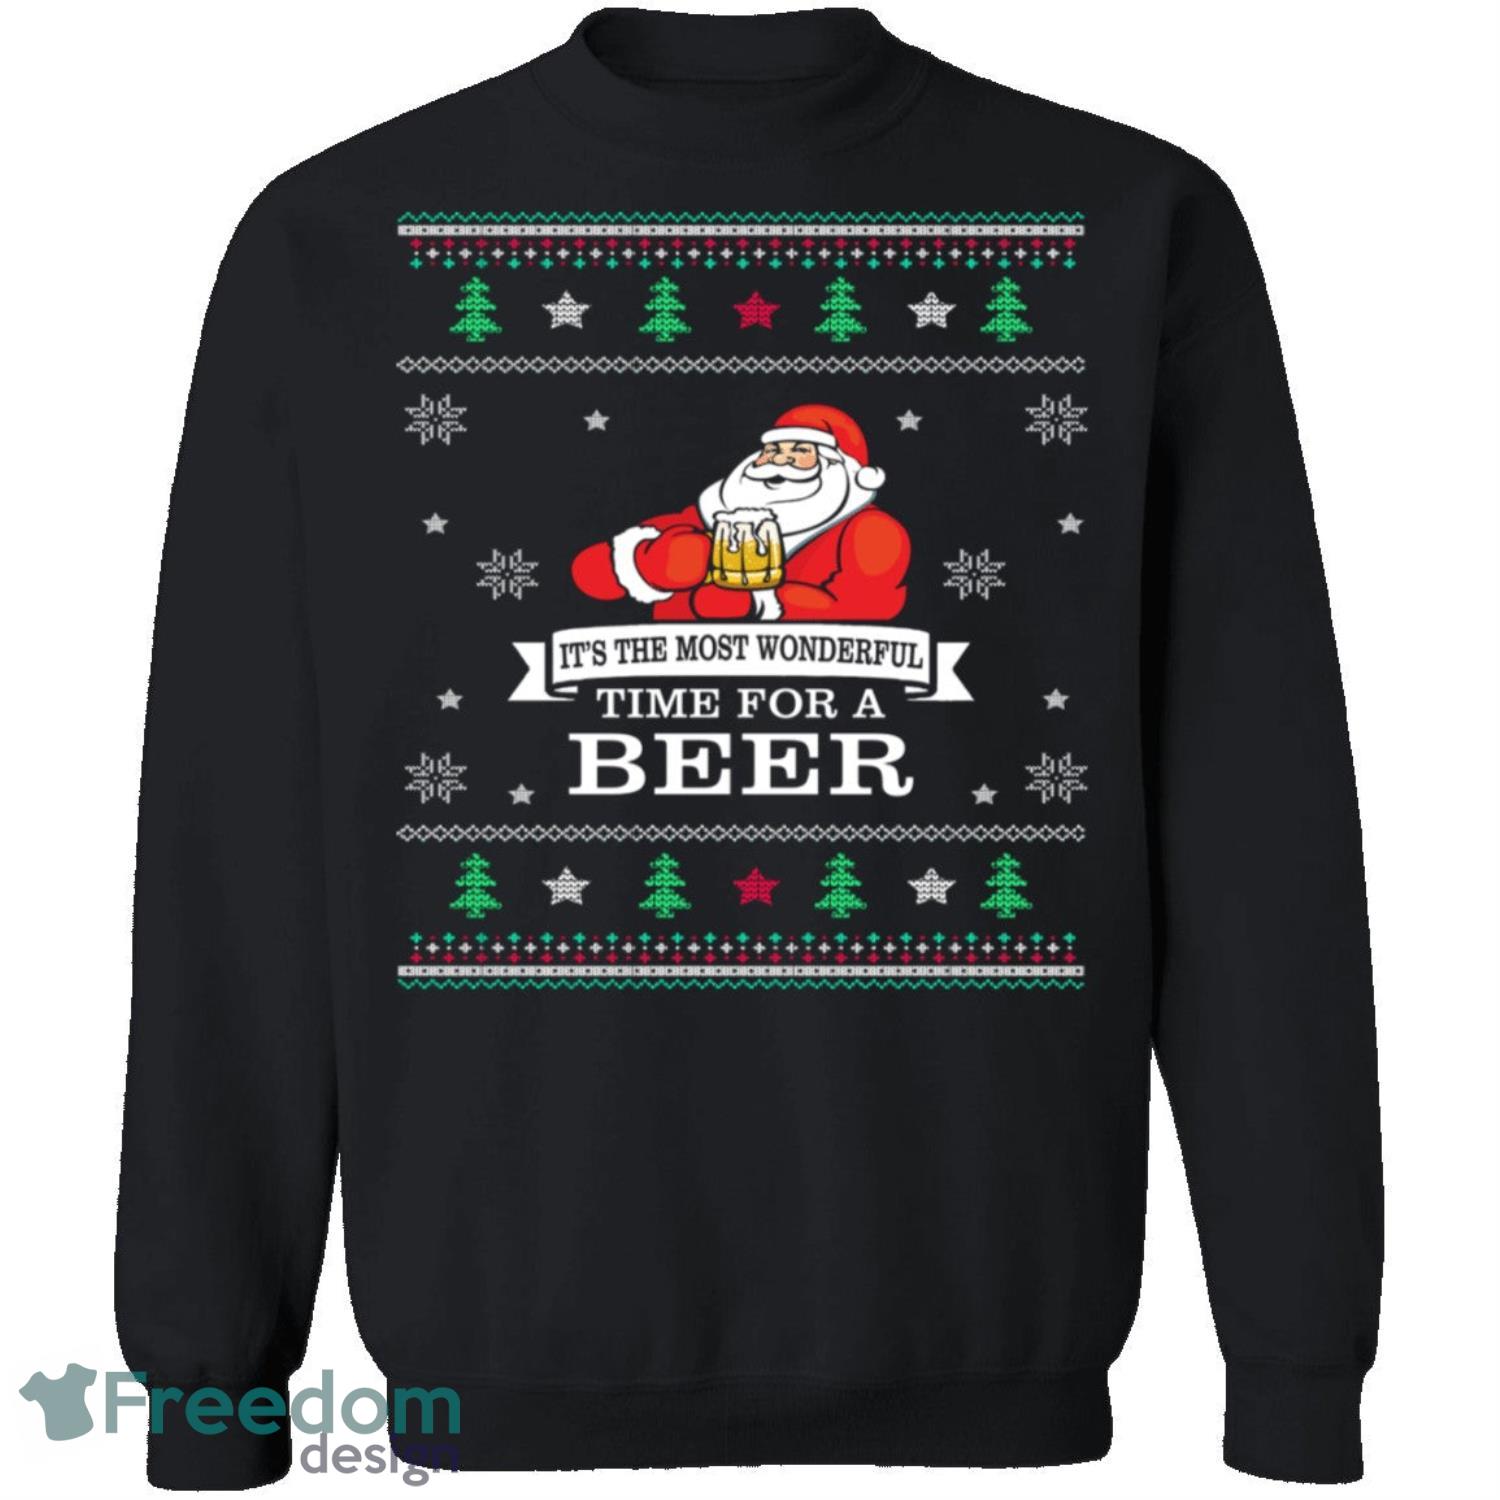 Beer Knitting Pattern Ugly Christmas Sweatshirt - beer-knitting-pattern-ugly-christmas-sweatshirt-1